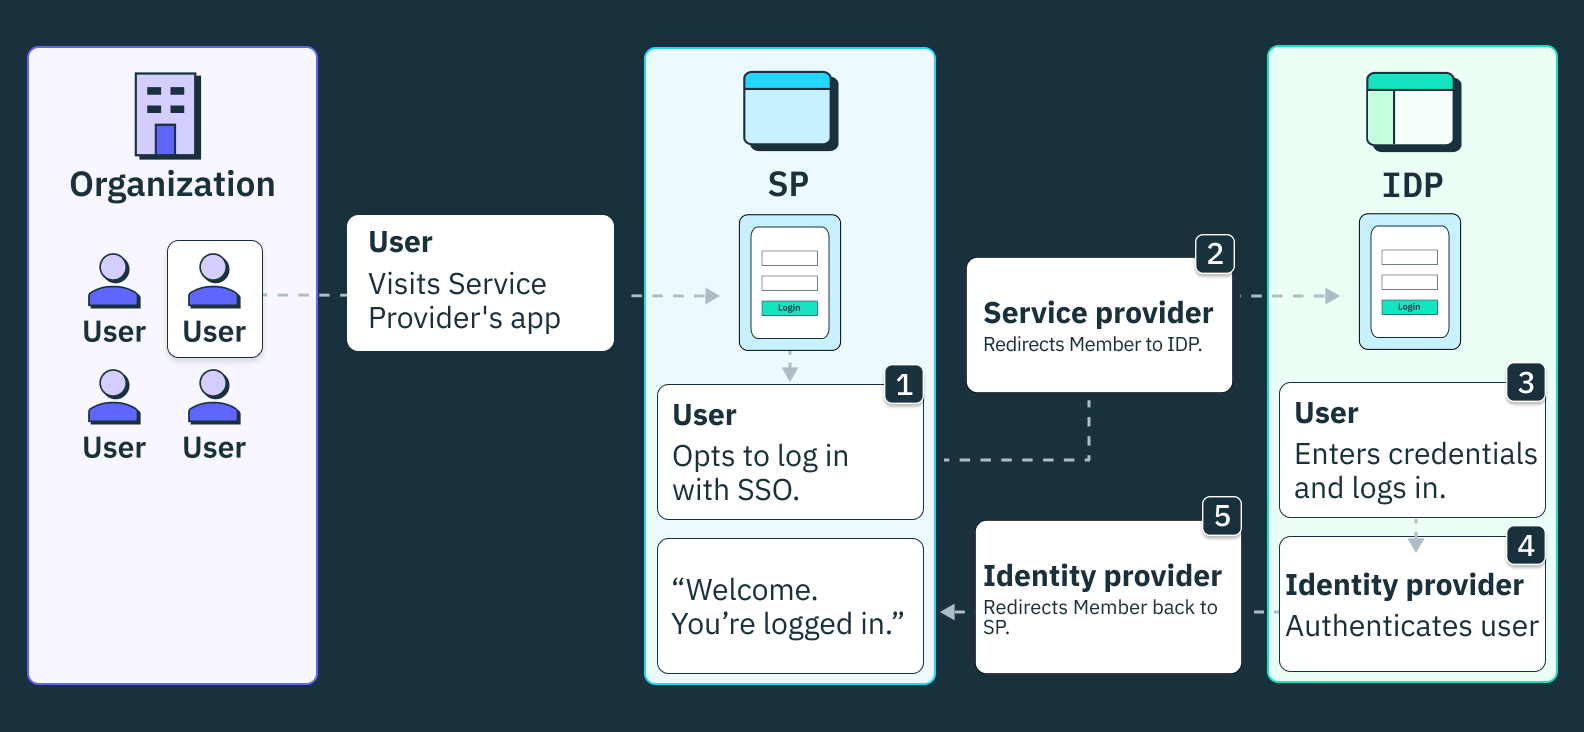 A diagram describing single sign on, in which a user opts for single sign on with a service provider, and is redirected to the identity provider for authentication.